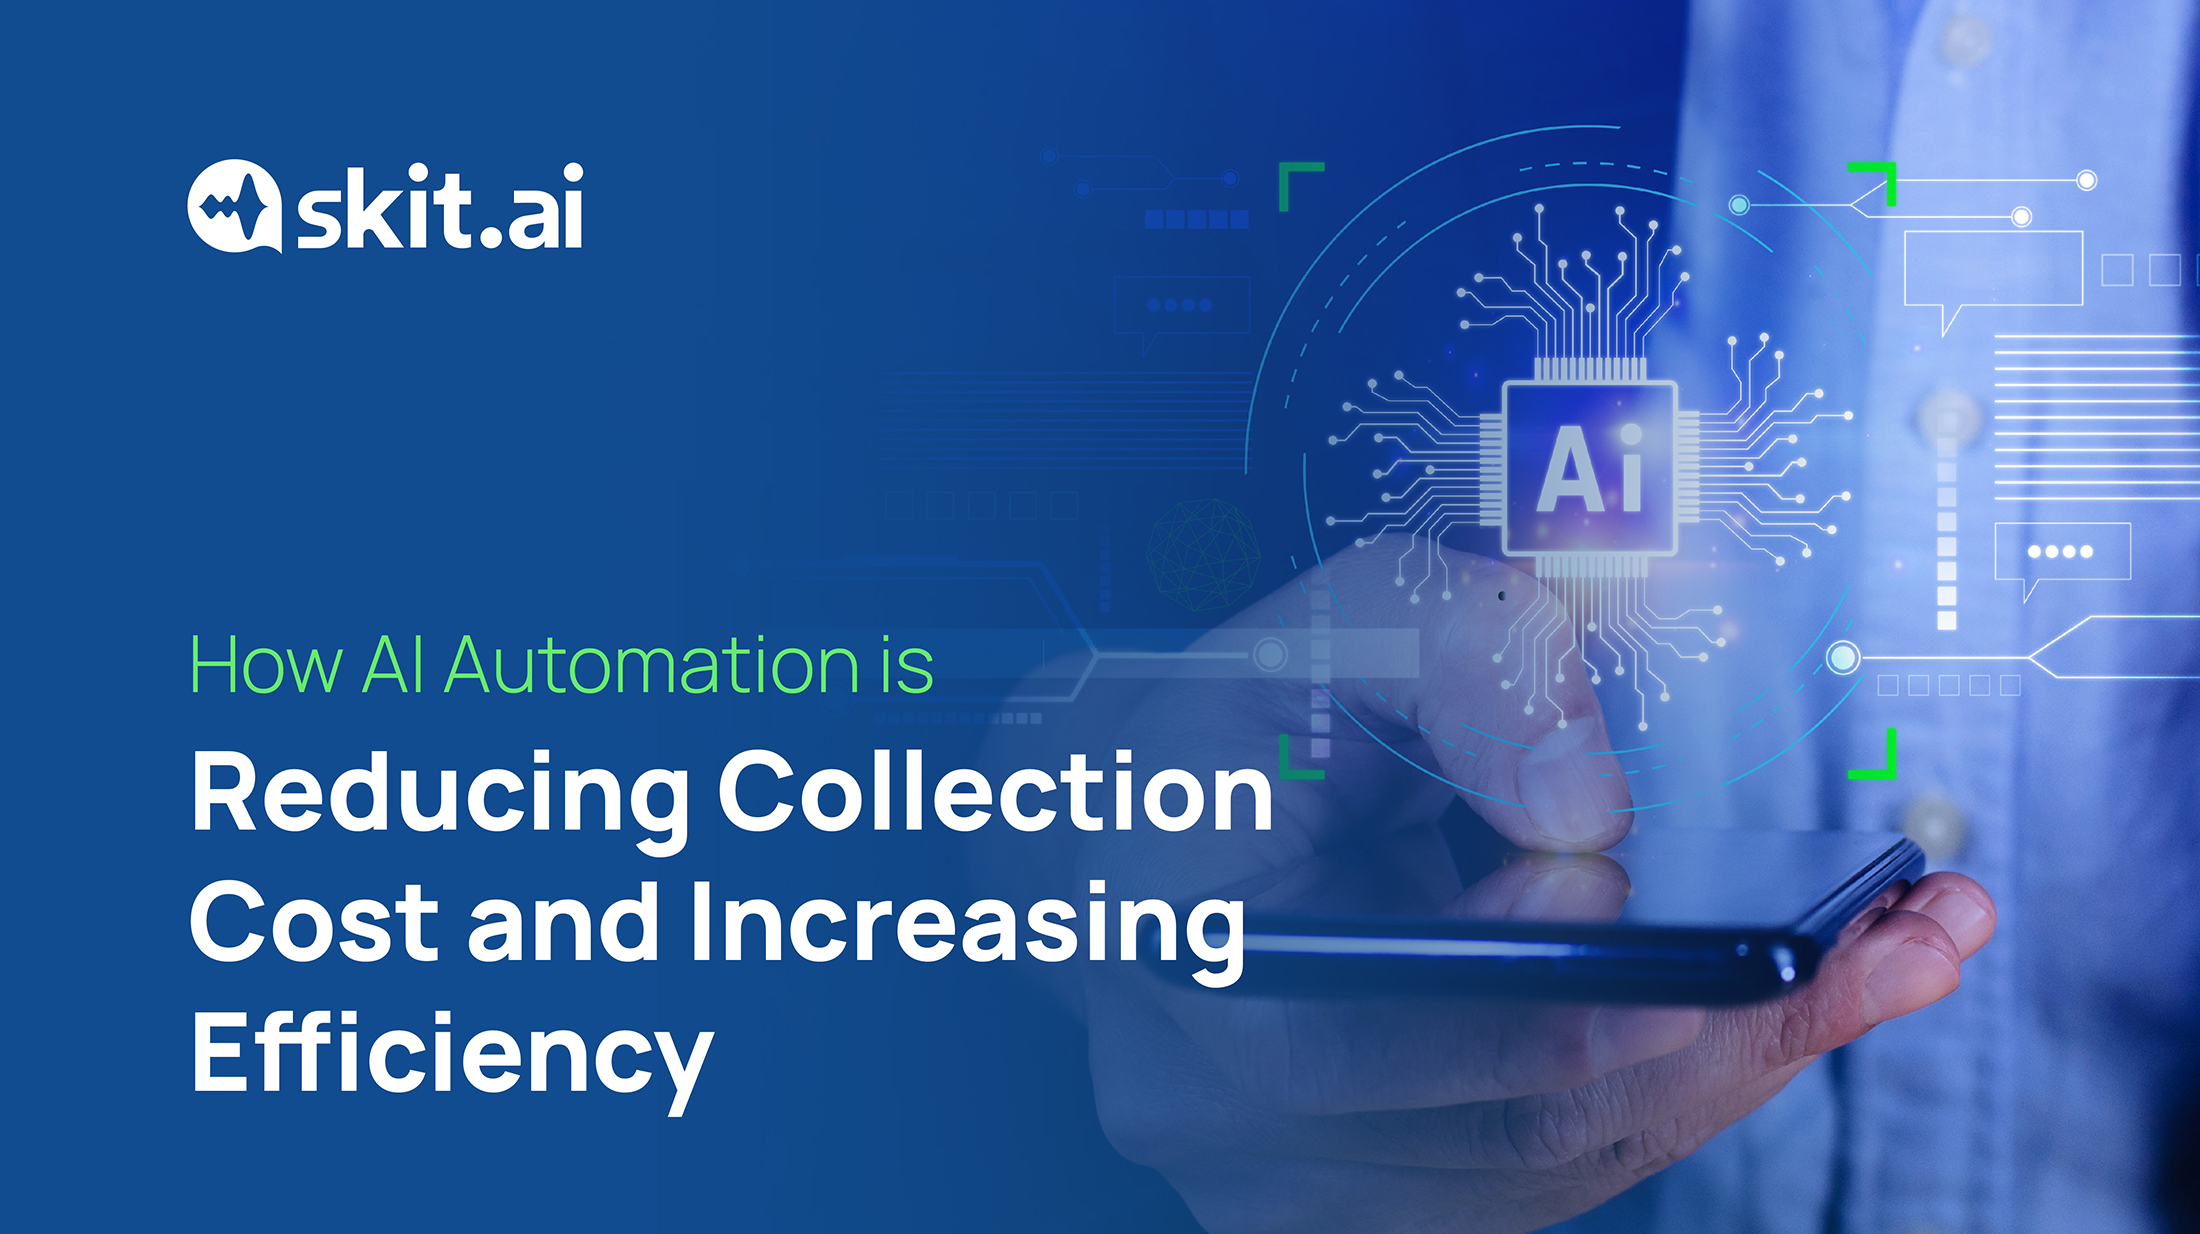 How Multichannel Conversational AI Can Reduce Collection Cost